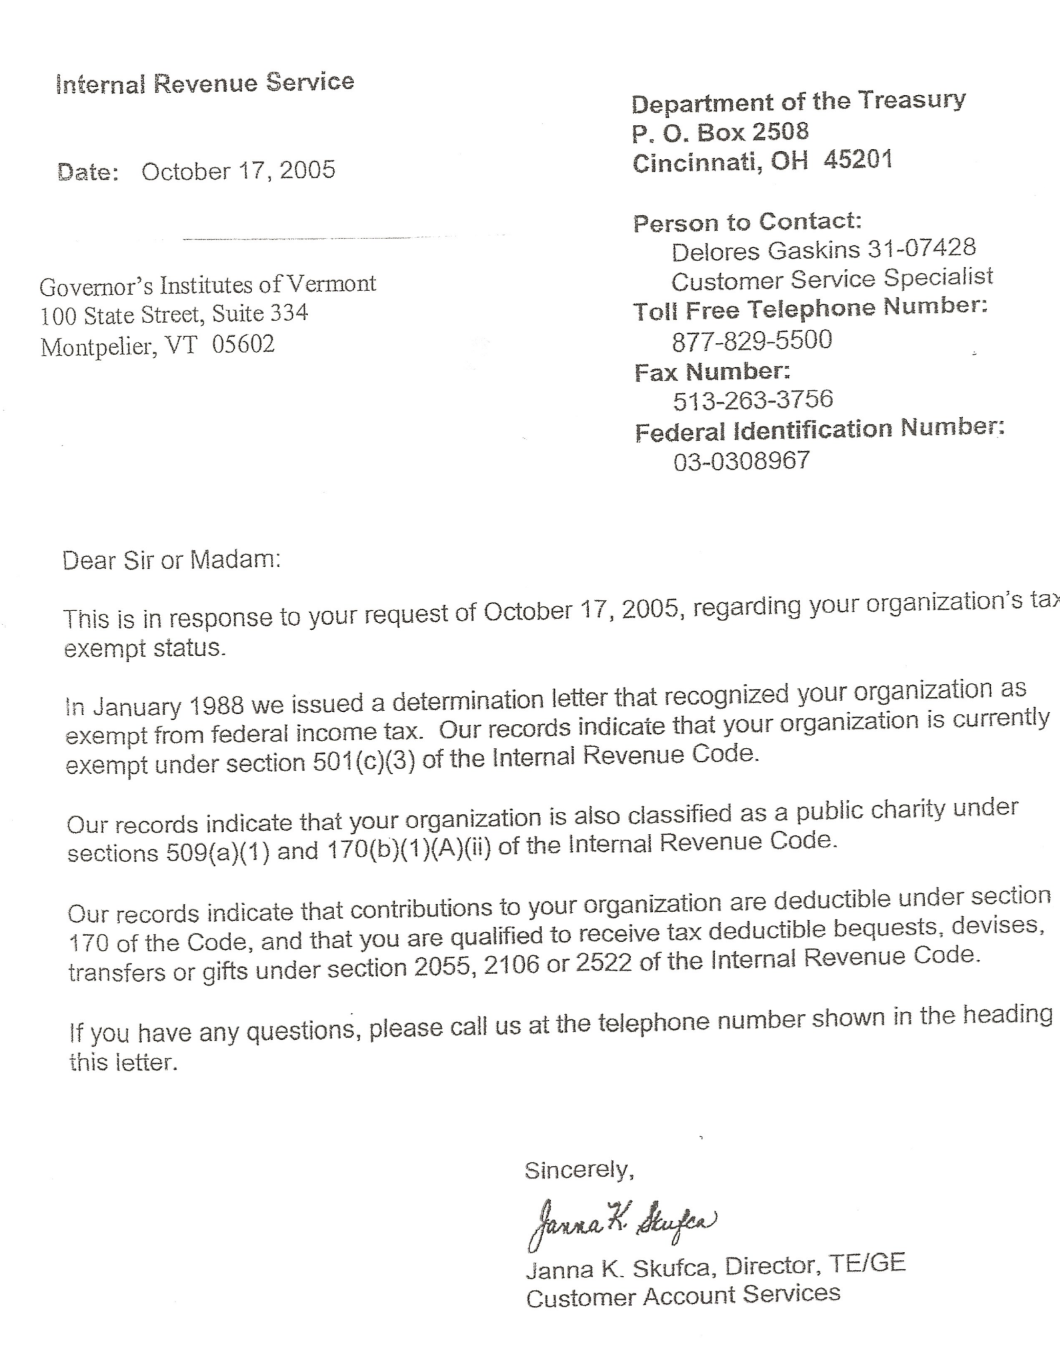 IRS 501(c)3 Tax Determination Letter